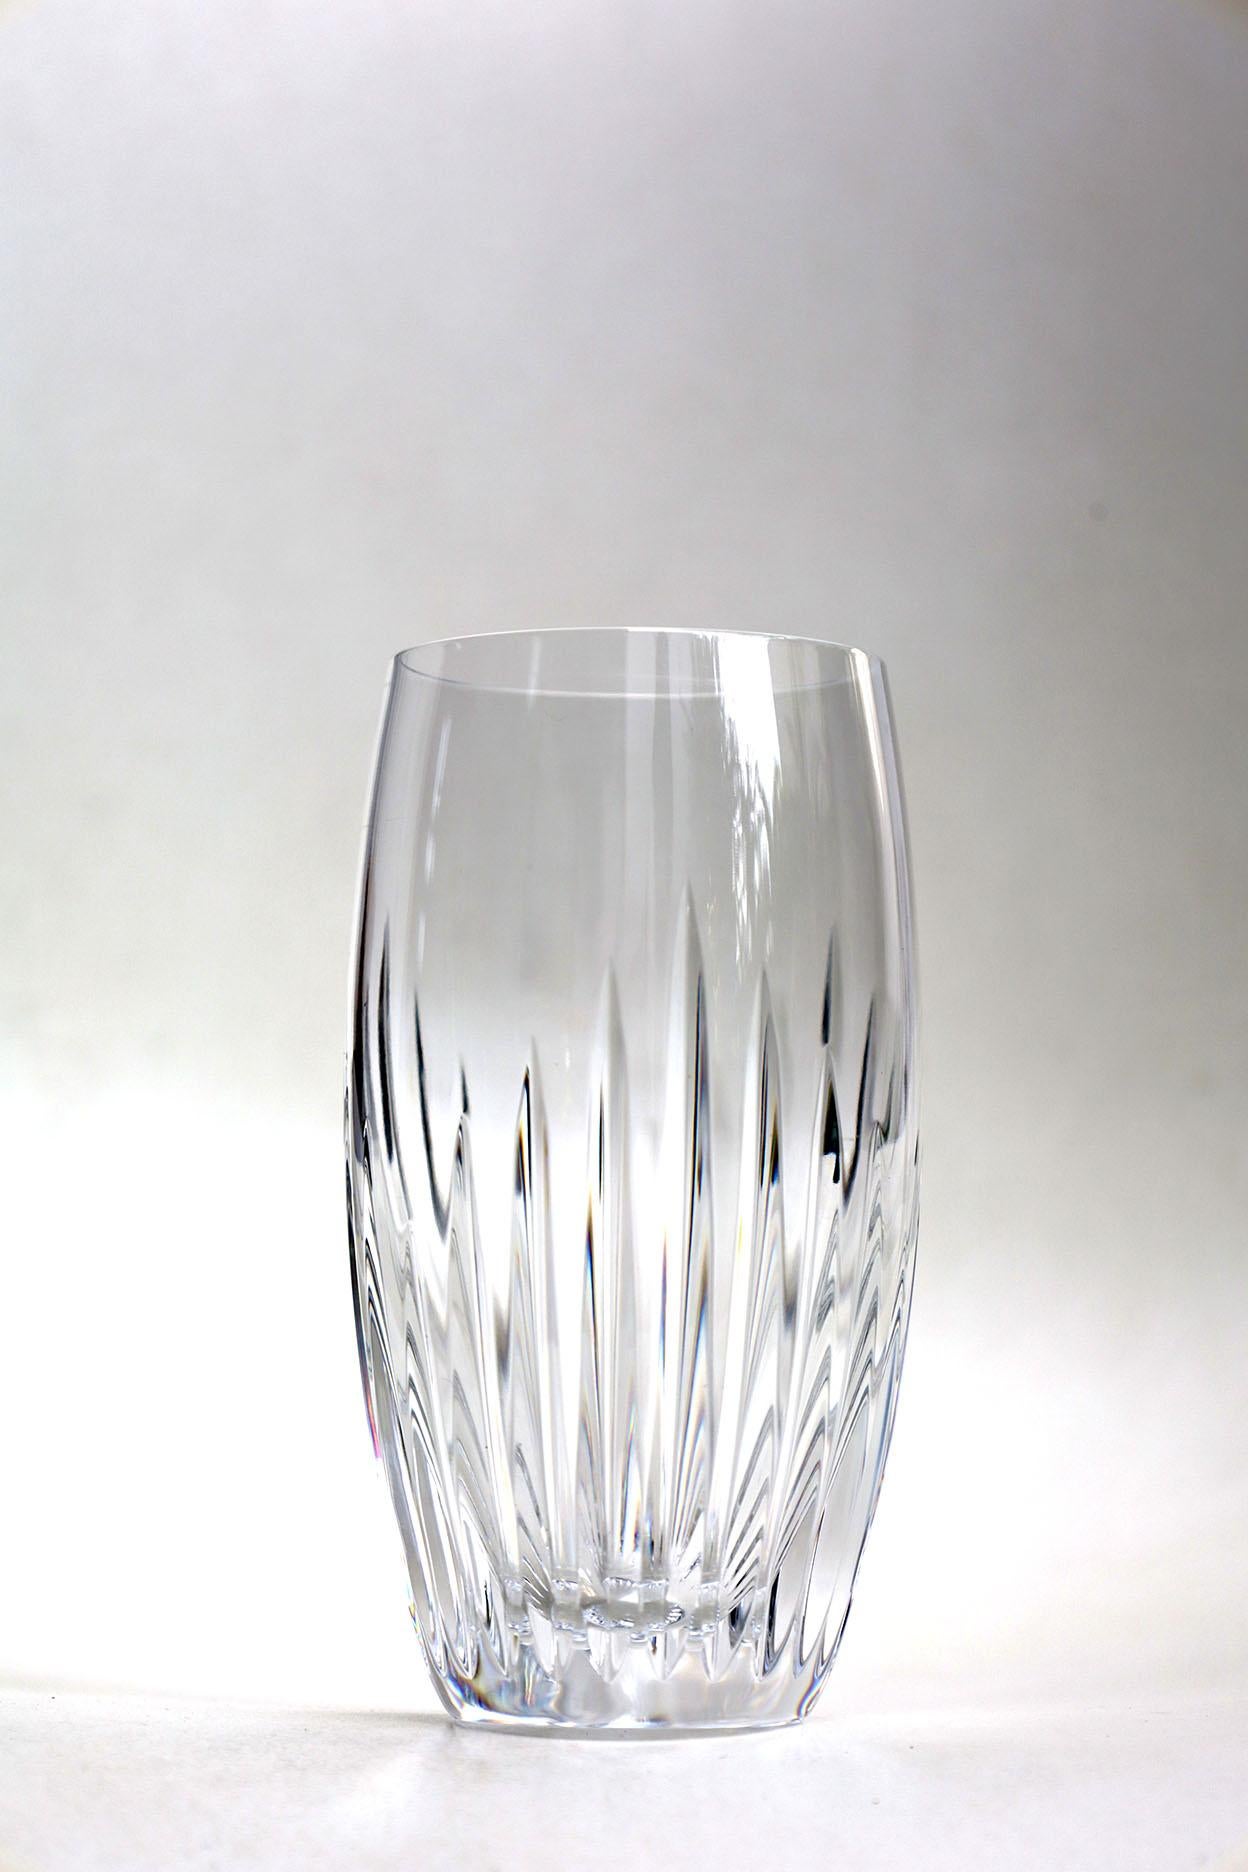 The intricate detailing gives the Massena glass the appearance of impressive heft, as if it were a modern-day chalice. The polished silhouette and prismatic qualities make it worthy of any festive occasion or special soirée. The glass is just one